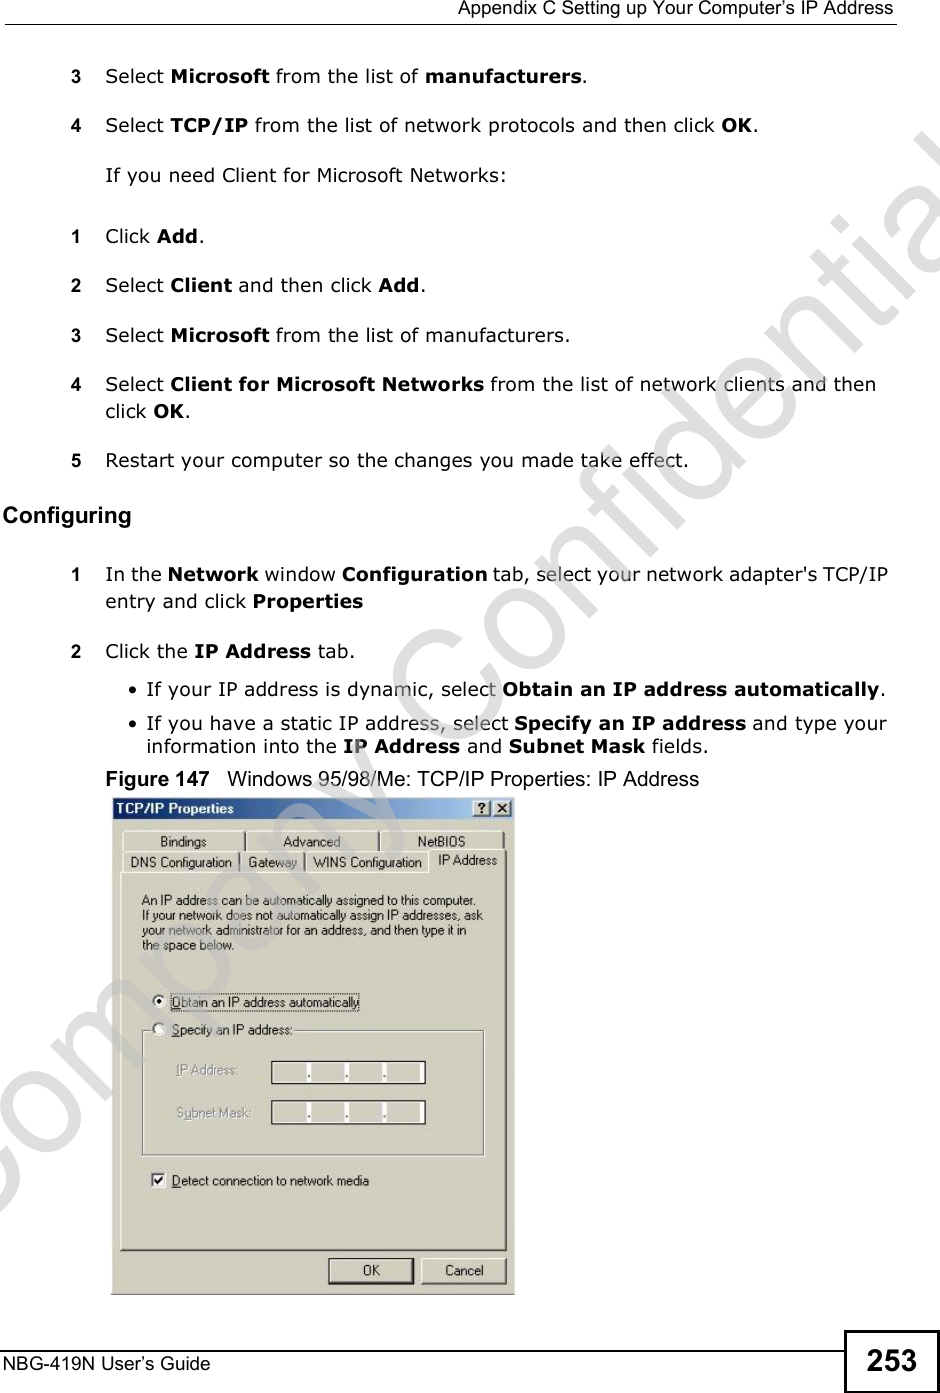  Appendix CSetting up Your Computer s IP AddressNBG-419N User s Guide 2533Select Microsoft from the list of manufacturers.4Select TCP/IP from the list of network protocols and then click OK.If you need Client for Microsoft Networks:1Click Add.2Select Client and then click Add.3Select Microsoft from the list of manufacturers.4Select Client for Microsoft Networks from the list of network clients and then click OK.5Restart your computer so the changes you made take effect.Configuring 1In the Network window Configuration tab, select your network adapter&apos;s TCP/IP entry and click Properties2Click the IP Address tab. If your IP address is dynamic, select Obtain an IP address automatically.  If you have a static IP address, select Specify an IP address and type your information into the IP Address and Subnet Mask fields.Figure 147   Windows 95/98/Me: TCP/IP Properties: IP AddressCompany Confidential